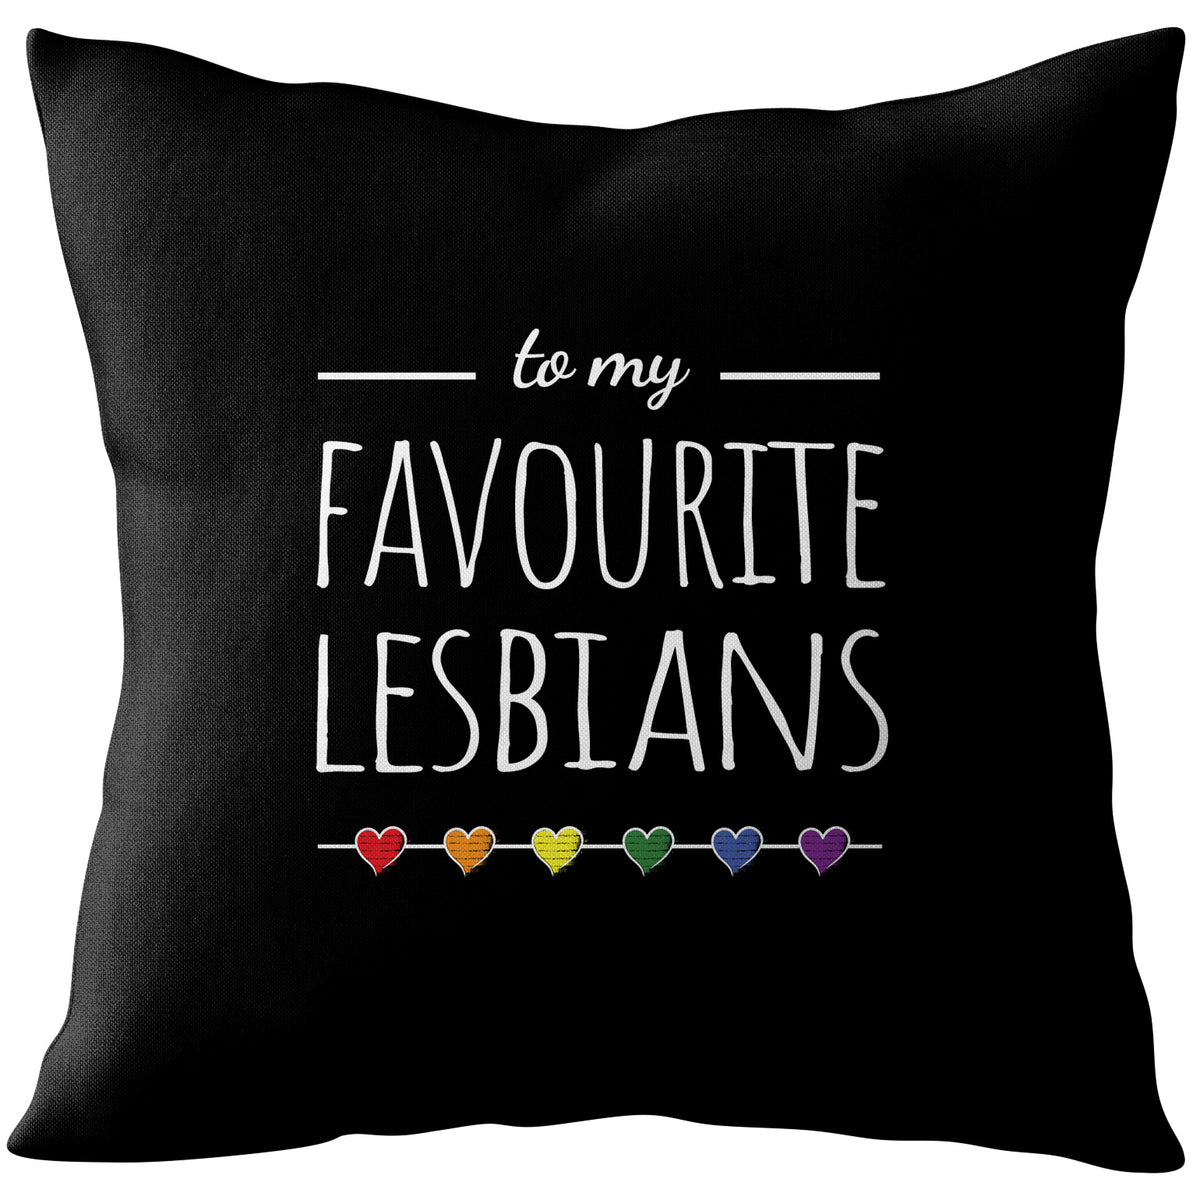 To my Favourite Lesbians - Lesbian Gay Couple Cushion | Gift